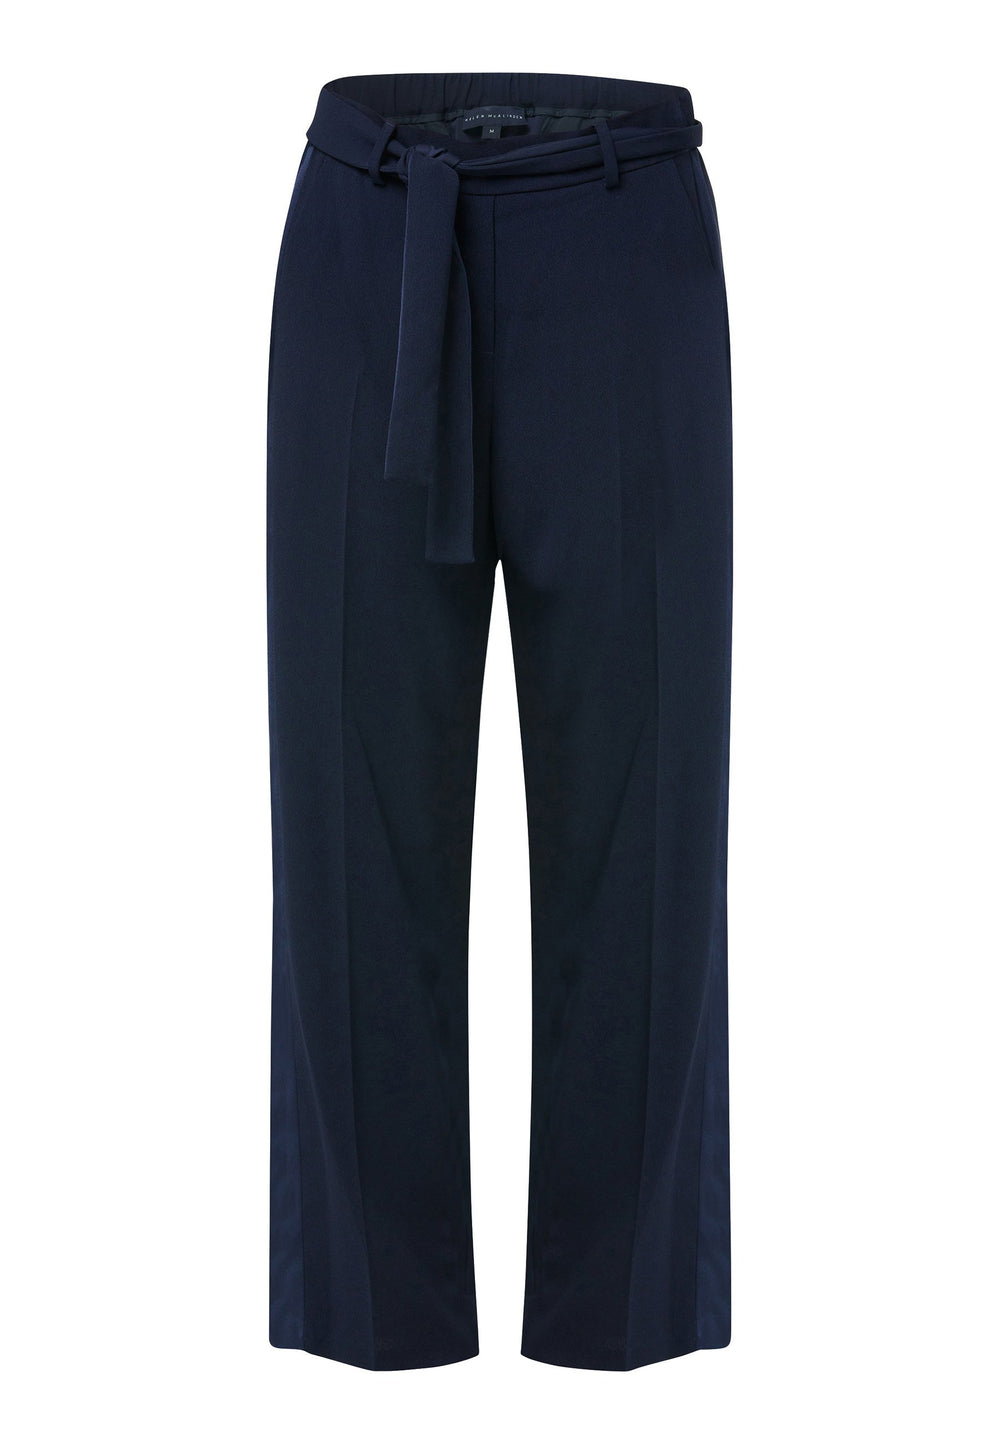  Delilah Midnight Navy Trousers, a classic wardrobe staple that combines comfort and relaxed elegance. These flat front pants are designed to sit at the natural waist and gracefully fall into a relaxed straight leg silhouette. With side pockets and an elasticated back waist, they ensure both style and comfort. 